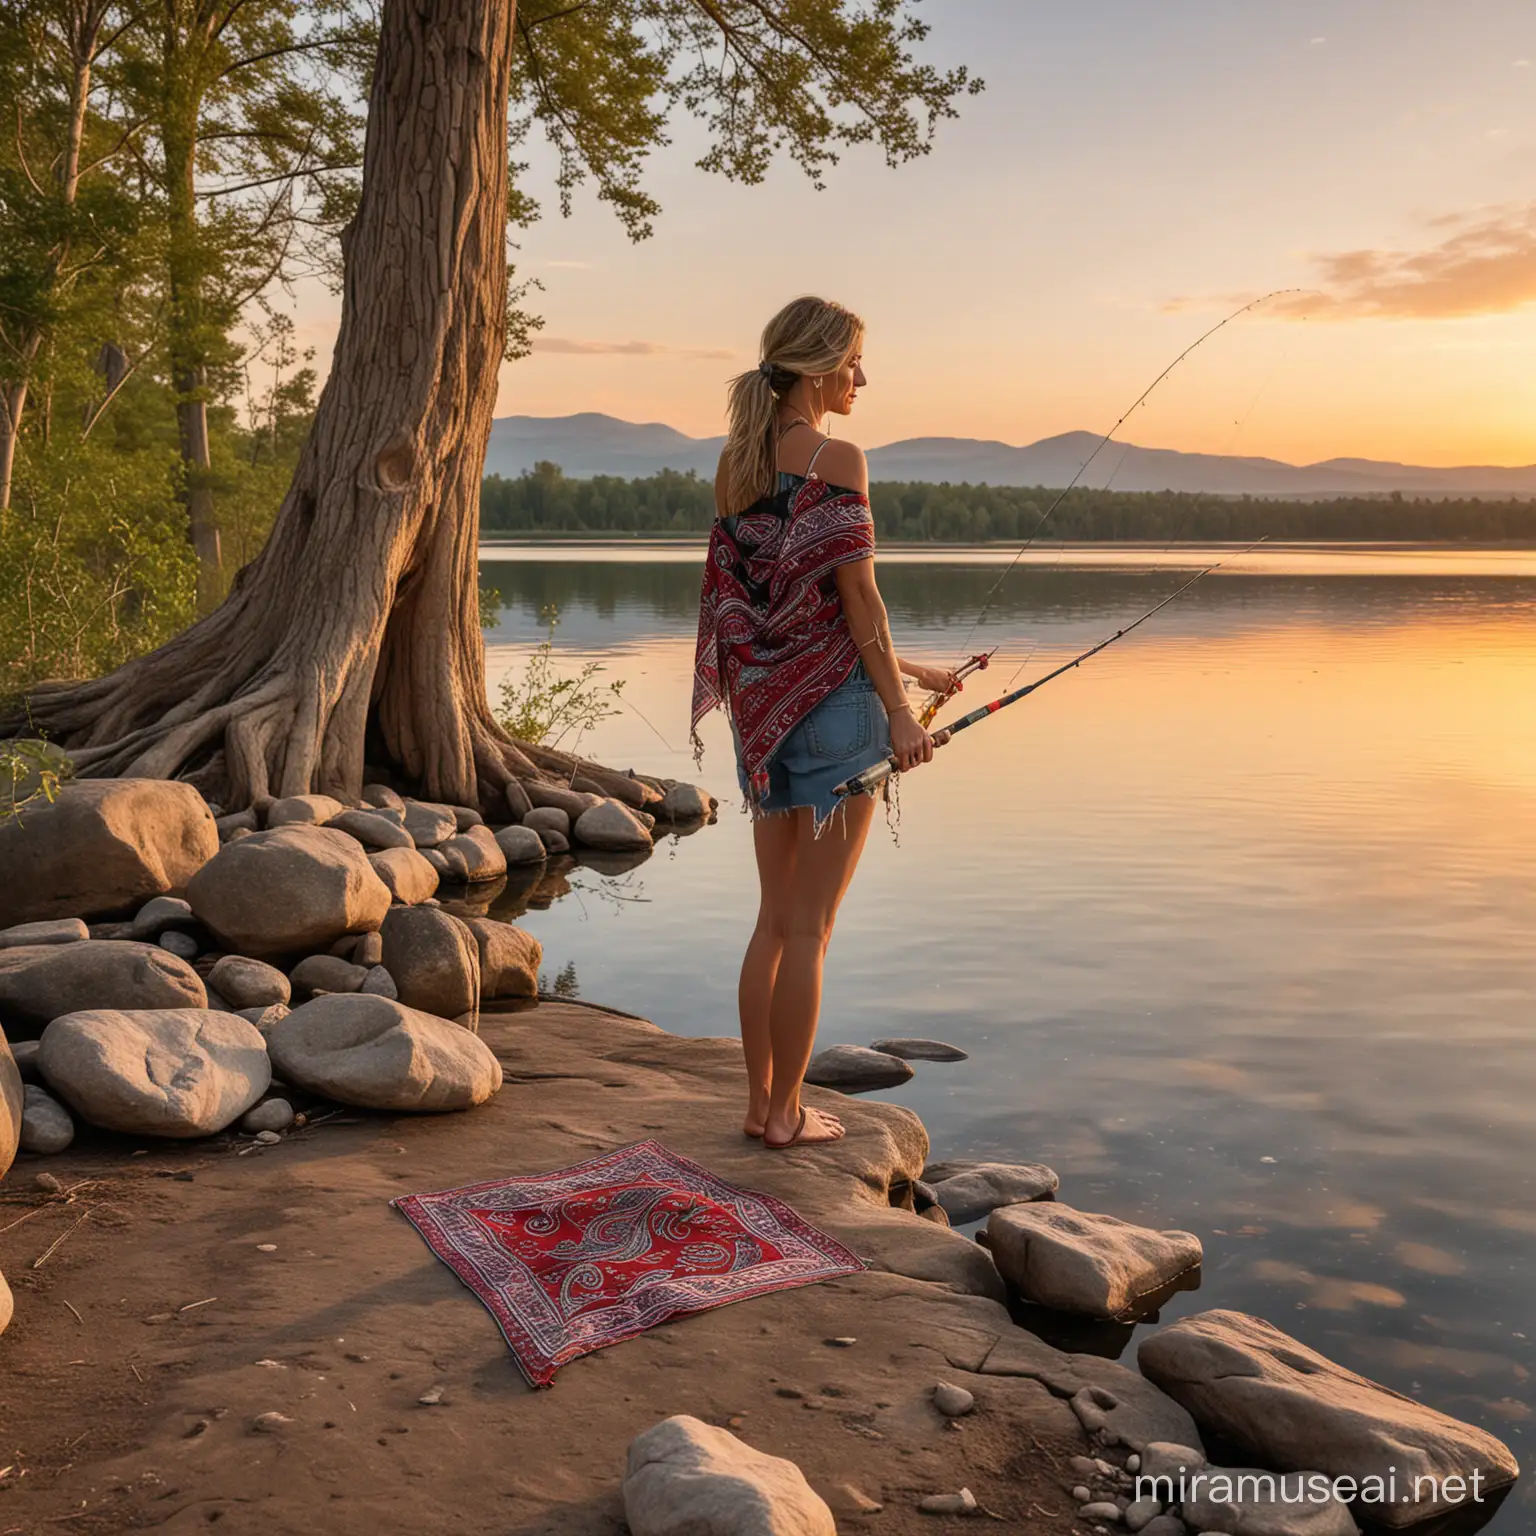 Tranquil Sunset Fishing by the Lake with a Barefoot Woman